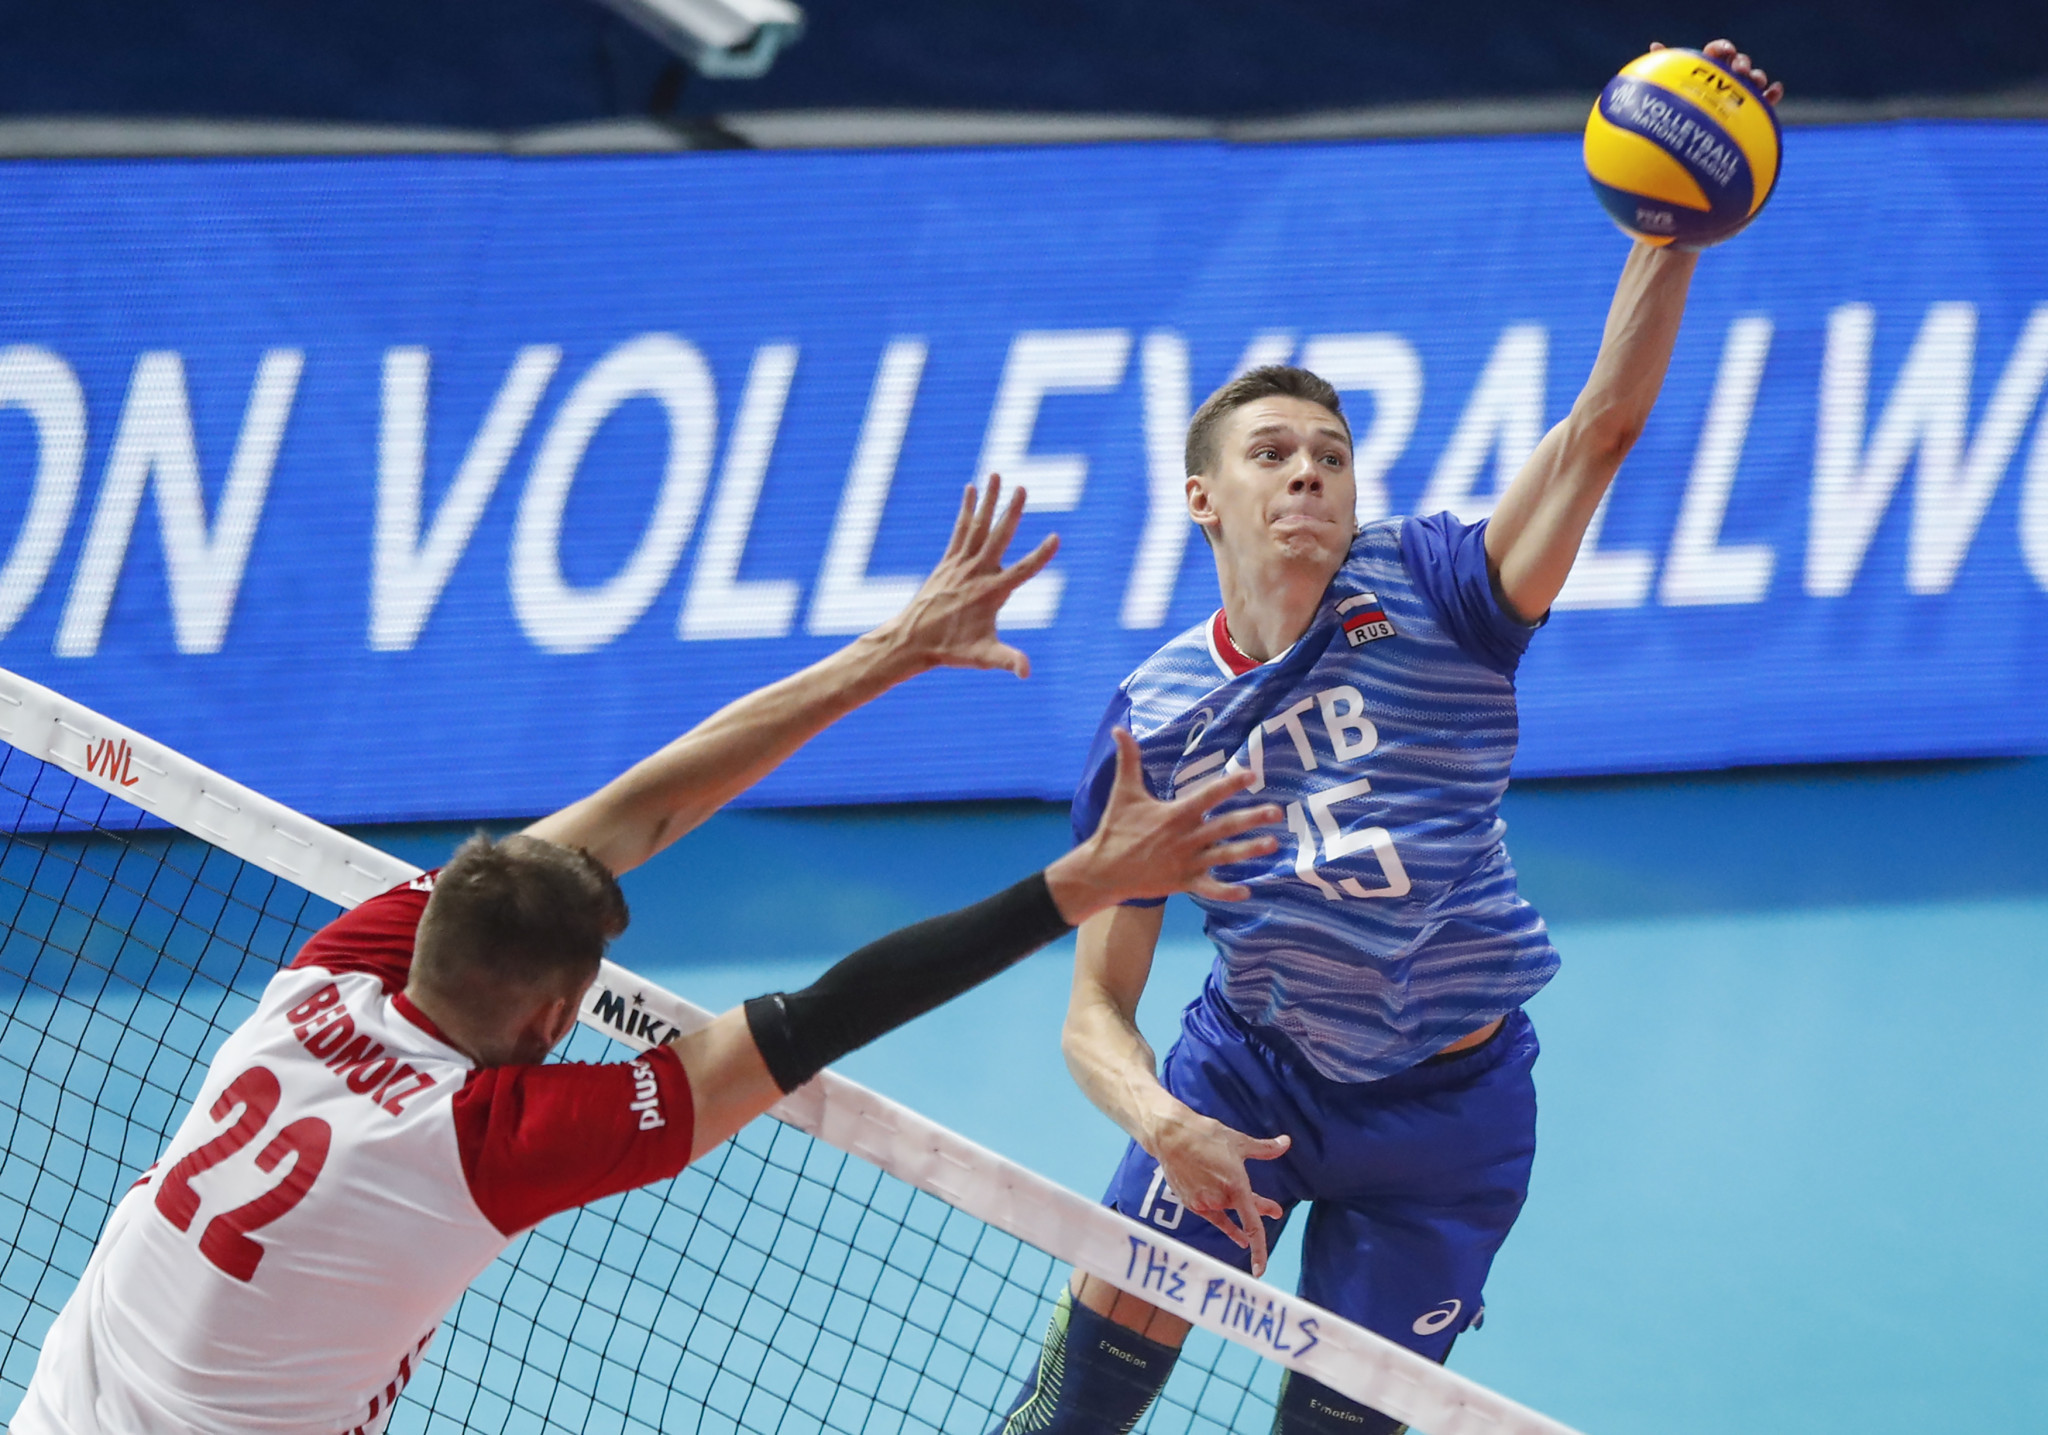 The International Volleyball Federation stripped Russia of this year's Volleyball Men’s World Championship following the invasion of Ukraine ©Getty Images